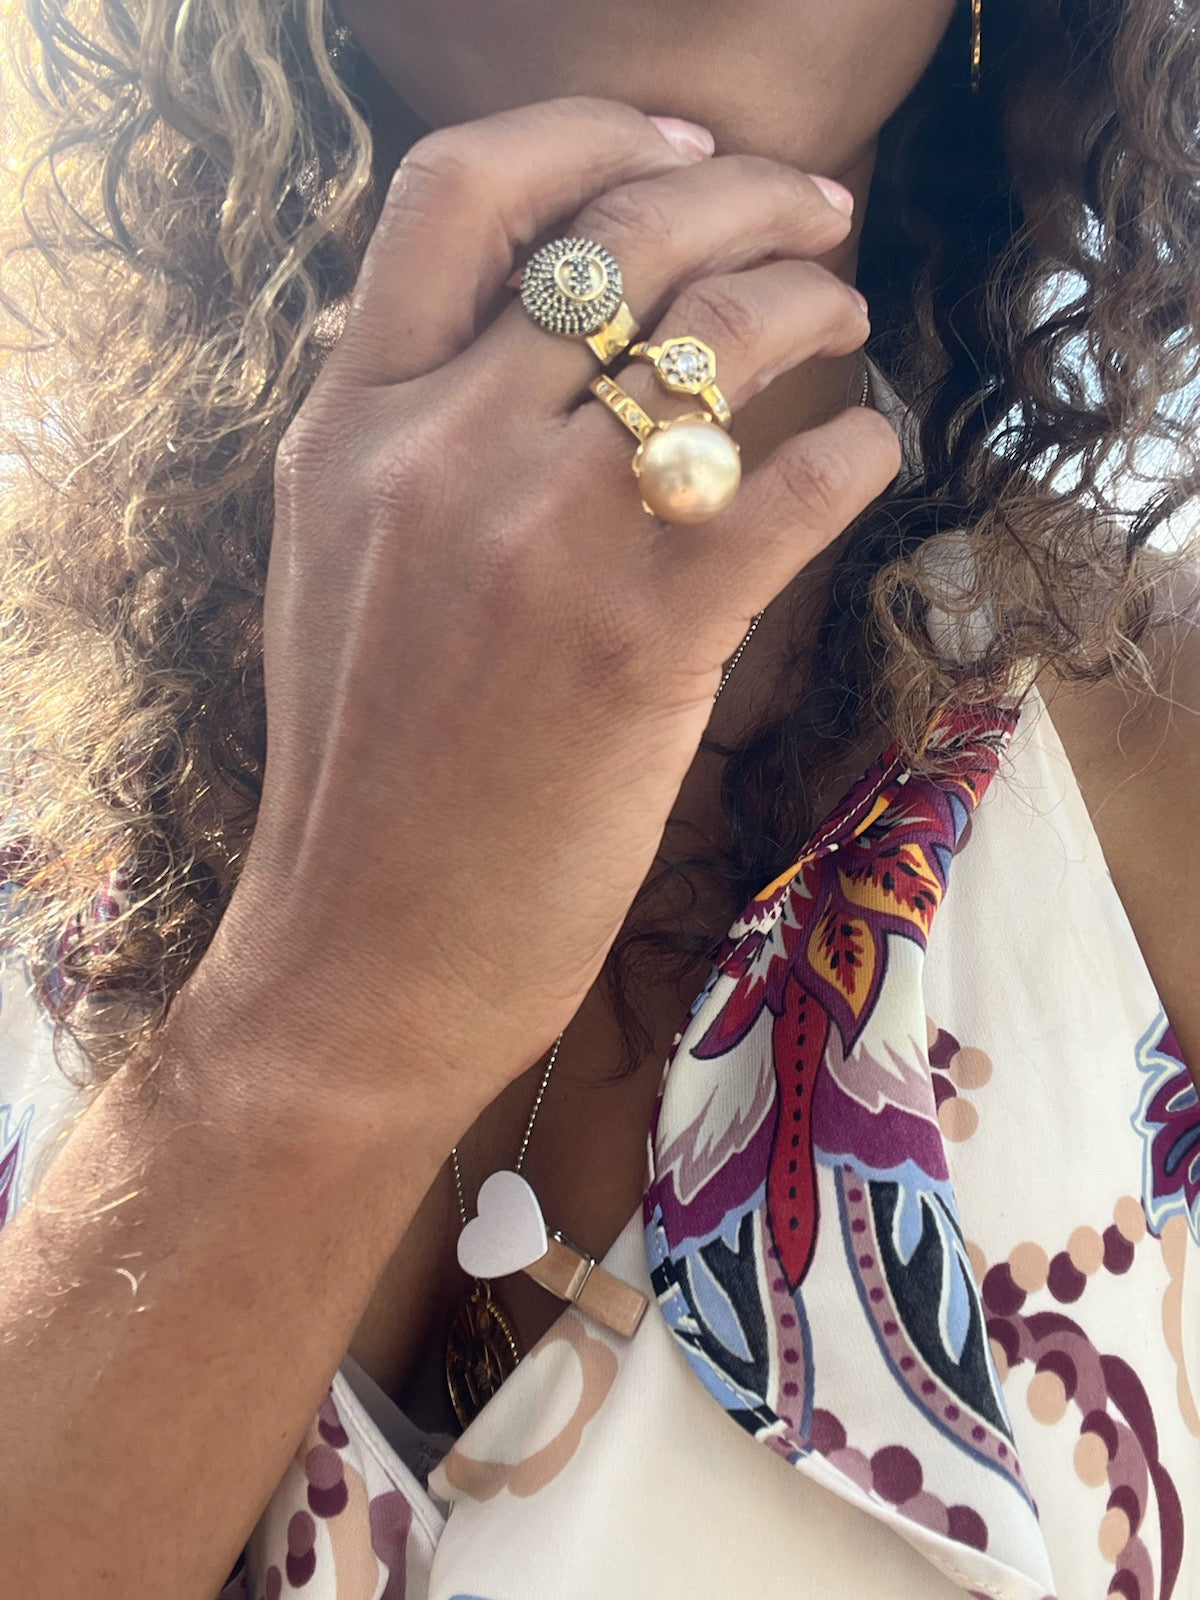 Black woman in floral dress with long hair wearing the Gold 8 sided octagon ring with an eight ball inscribed in black diamonds from the wandering jewel